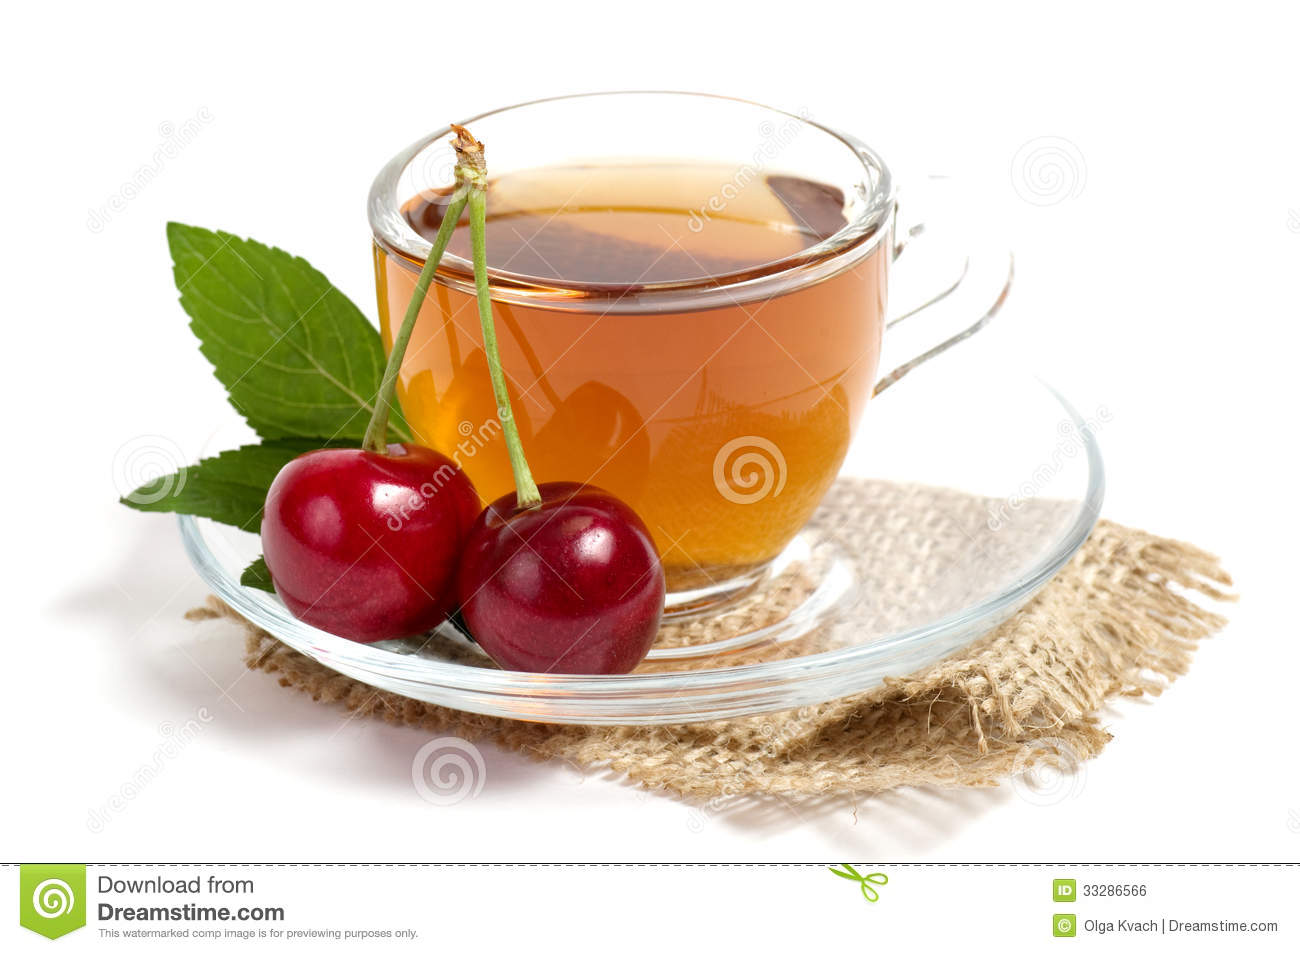 Fruit Tea In Cup Royalty Free Stock Image   Image  33286566